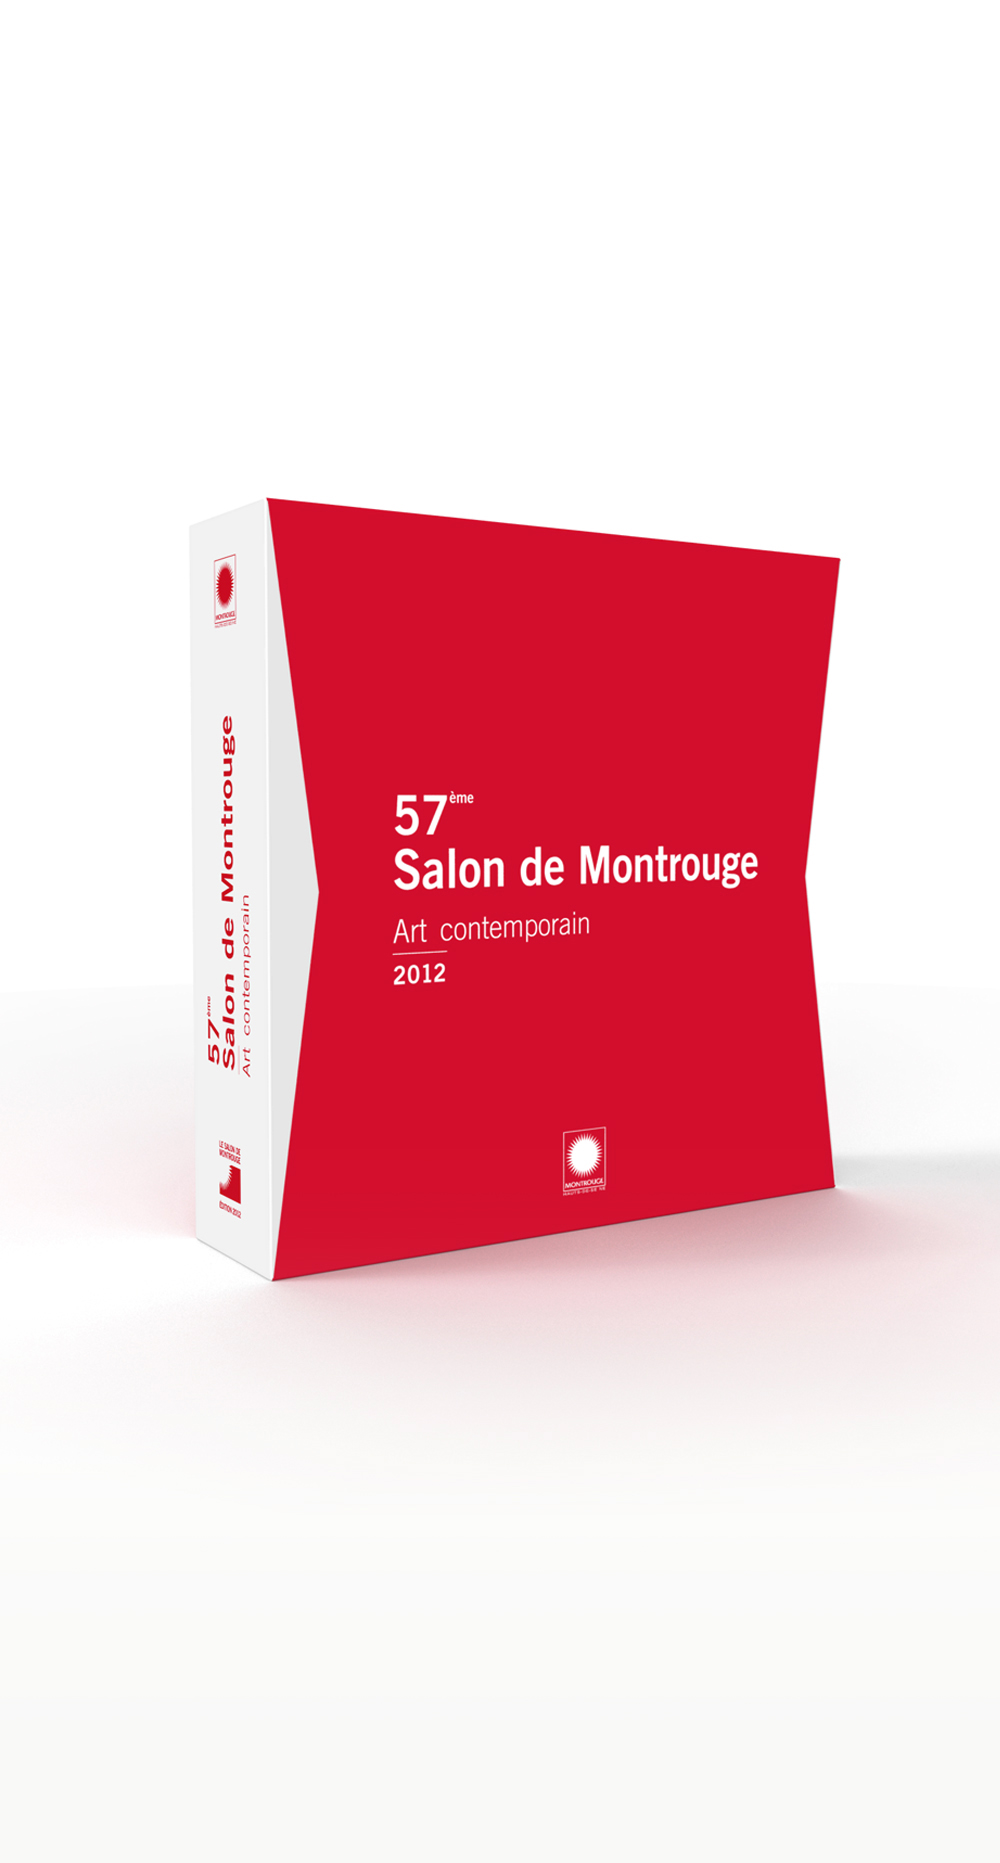 Catalogue and sleeve for the 47th Salon de Montrouge